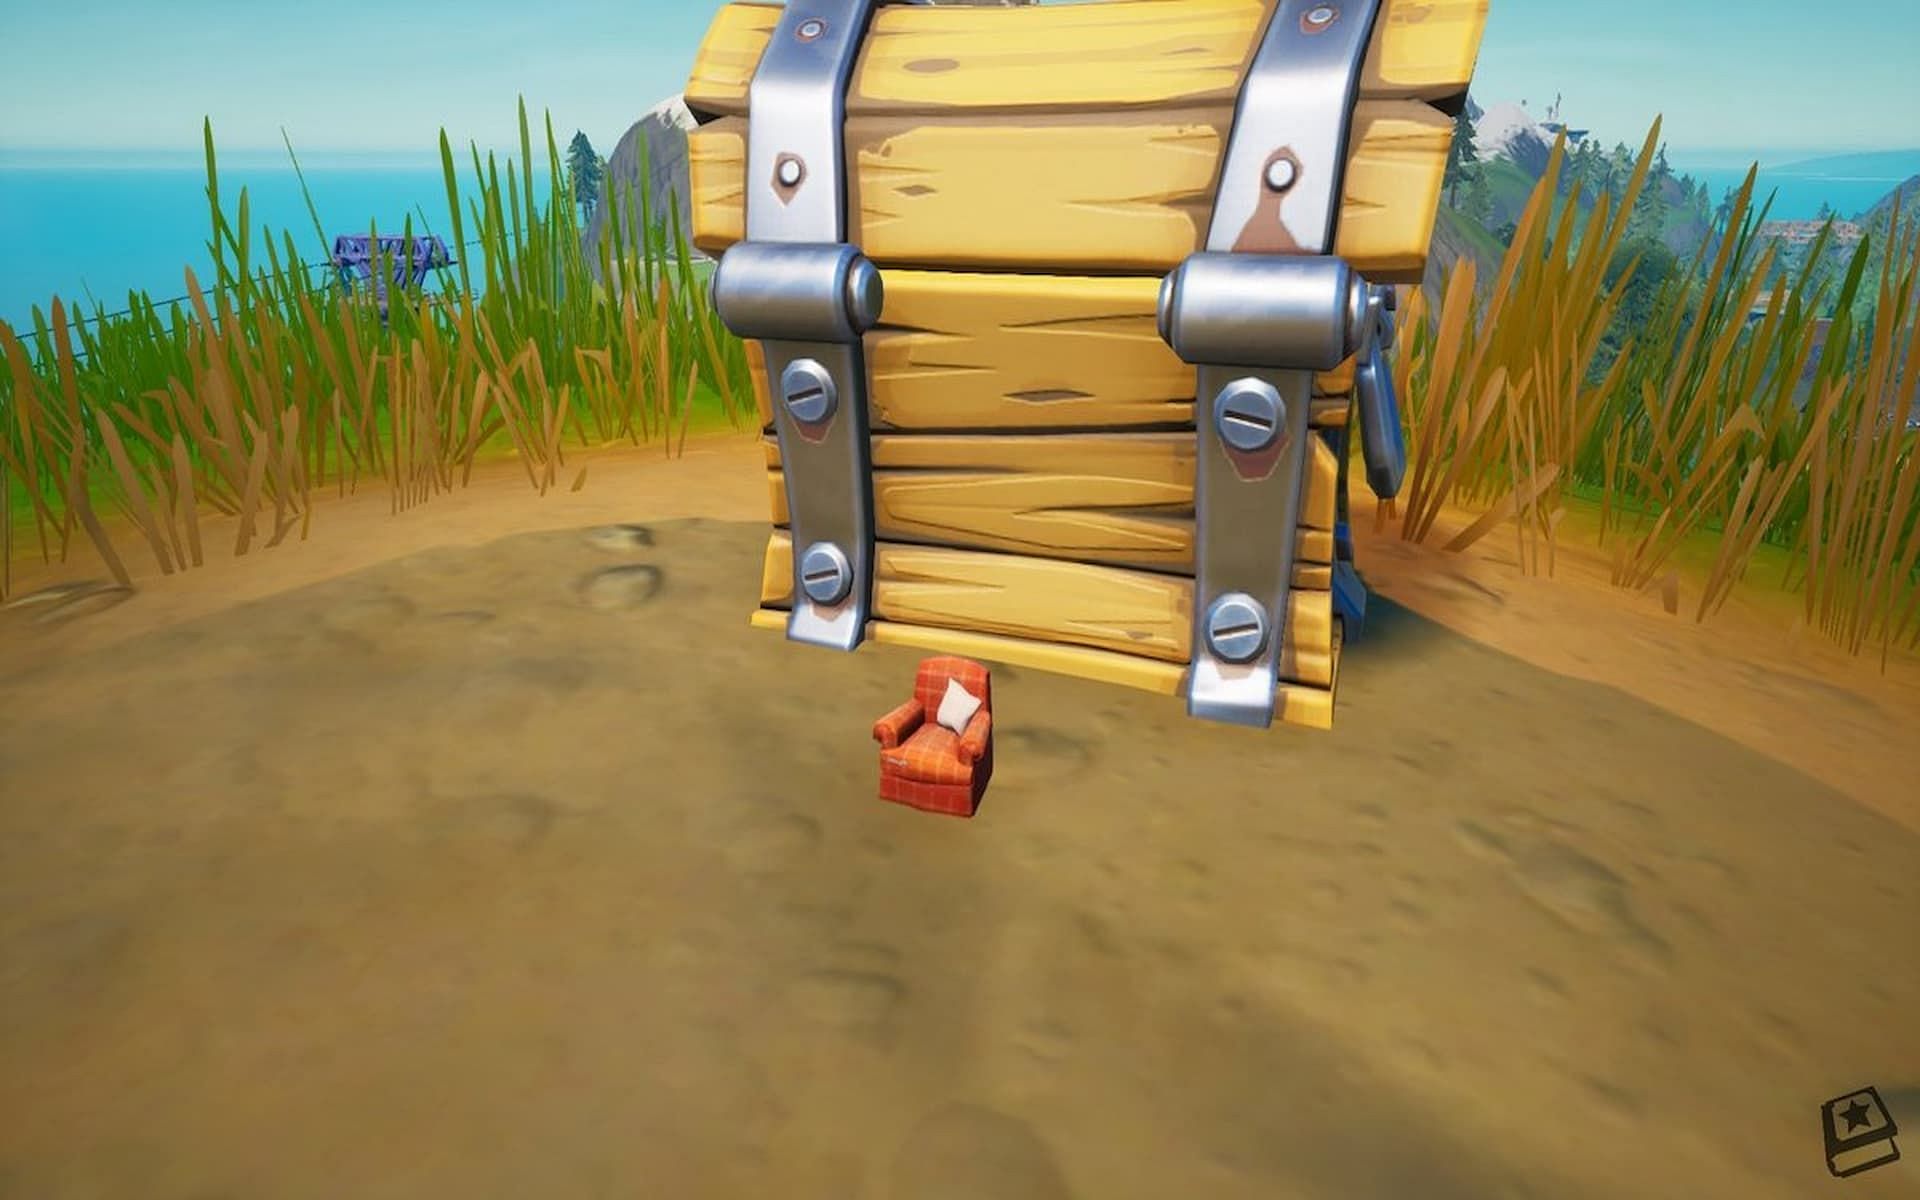 The shrinking chair found on the island (Image via Epic Games)